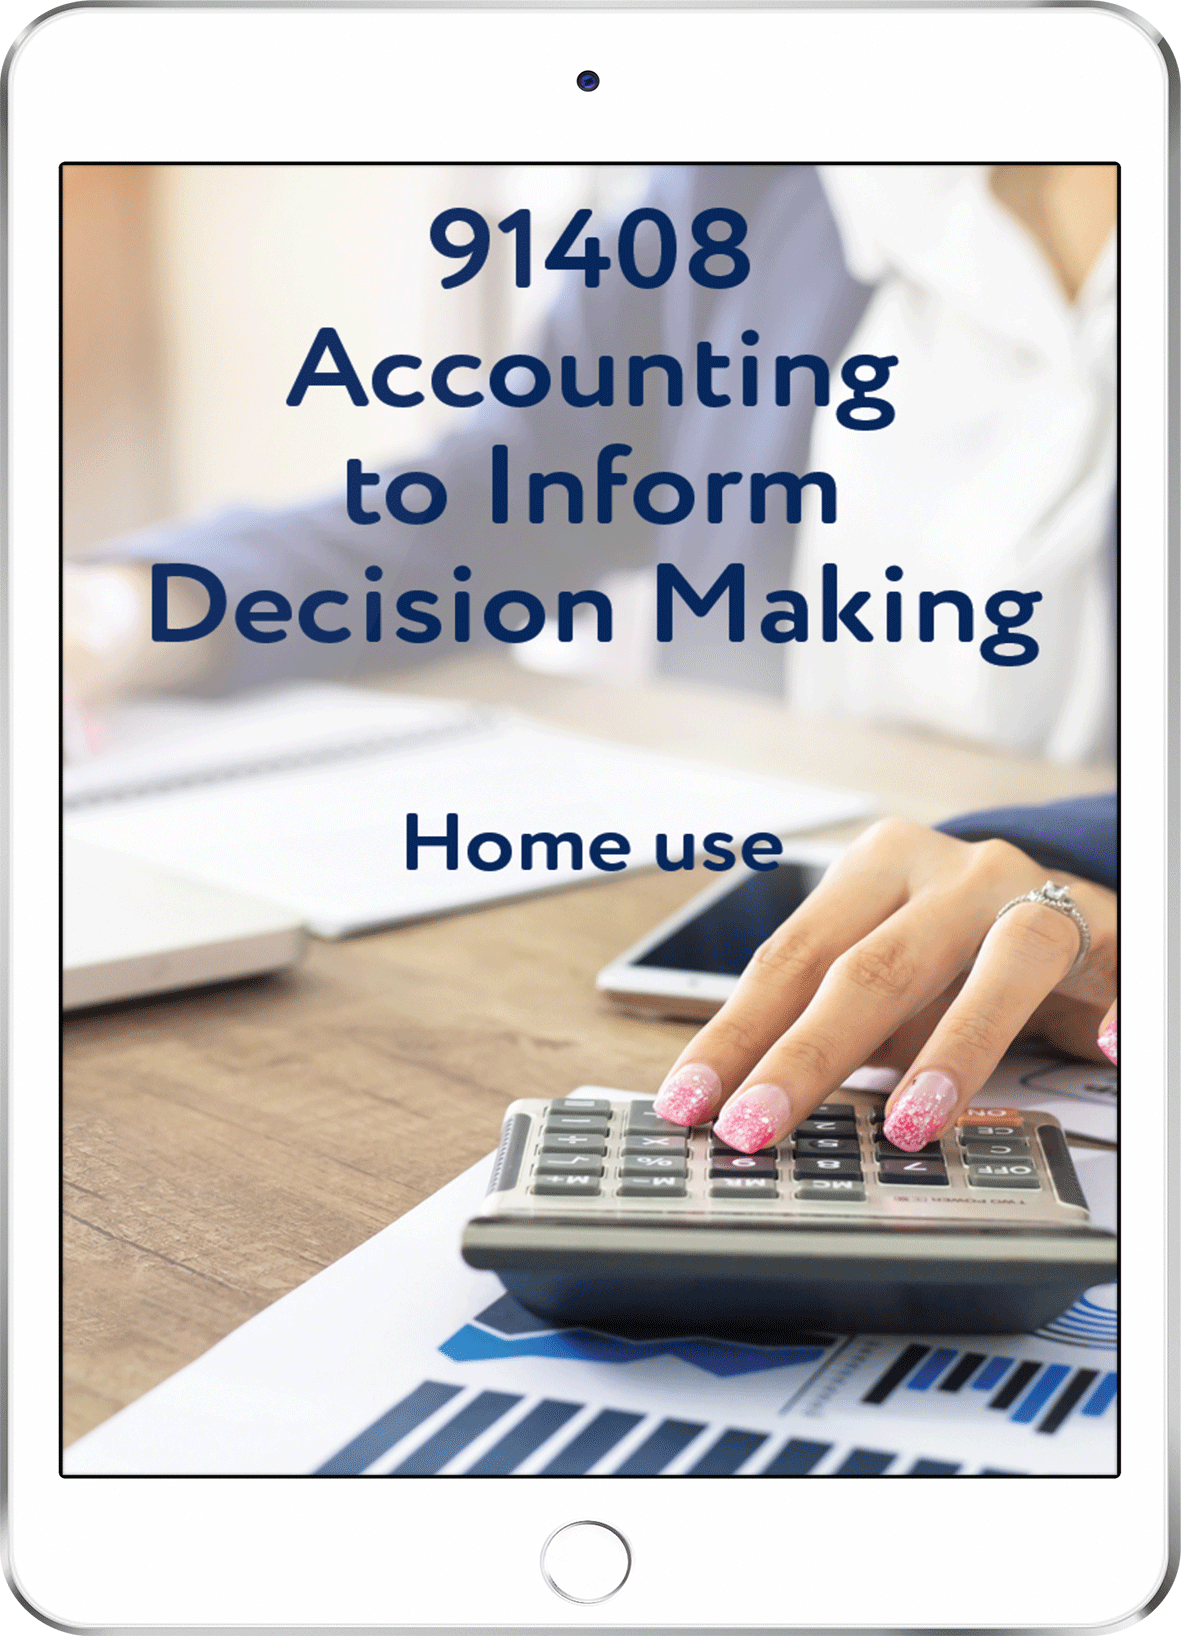 91408 Accounting to Inform Decision Making - Home Use